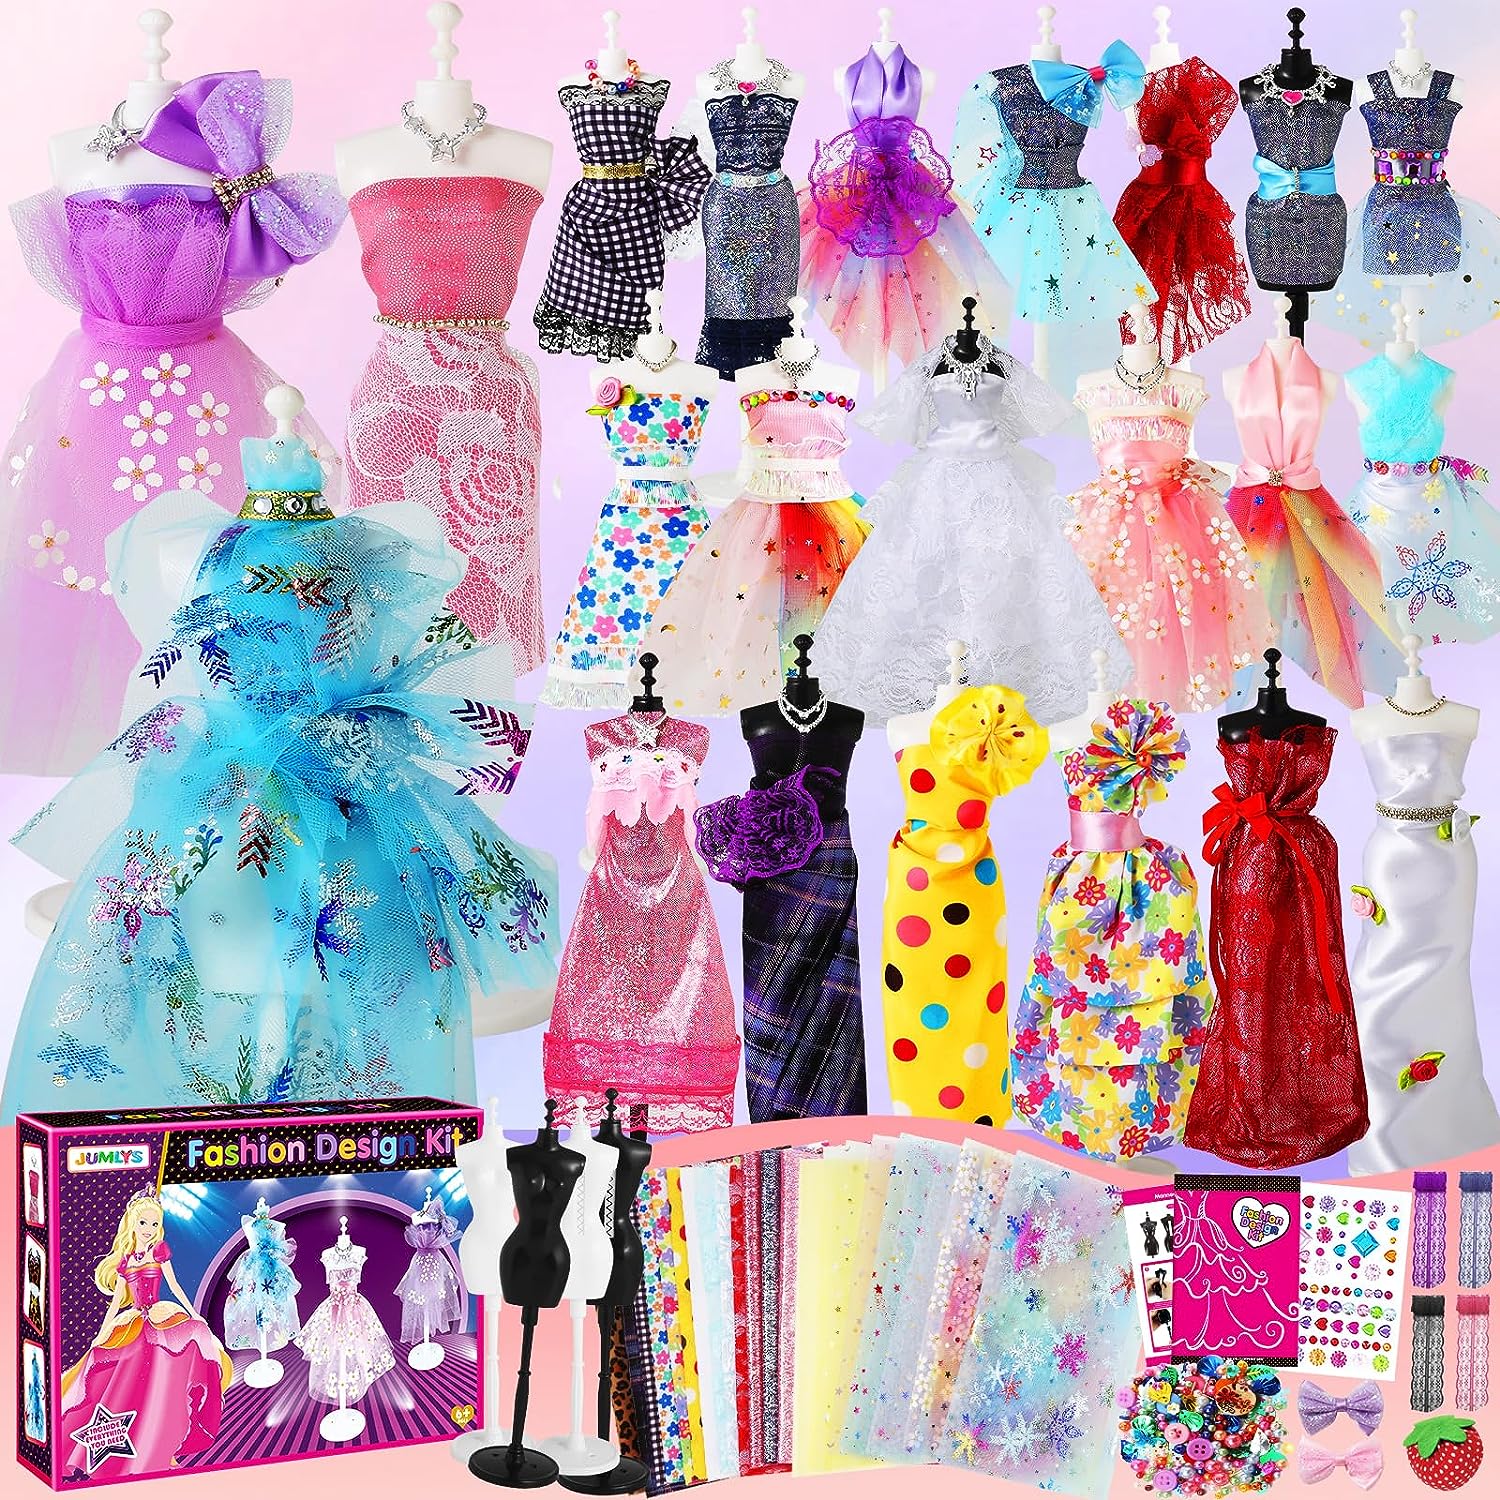  OCHIDO 600+Pcs Fashion Designer Kits for Girls 6 7 8 9 10 11 12  Years Old,DIY Arts & Crafts Girls Set with 4 Mannequins,Sewing Kit for Kids  for Birthday Christmas Gift